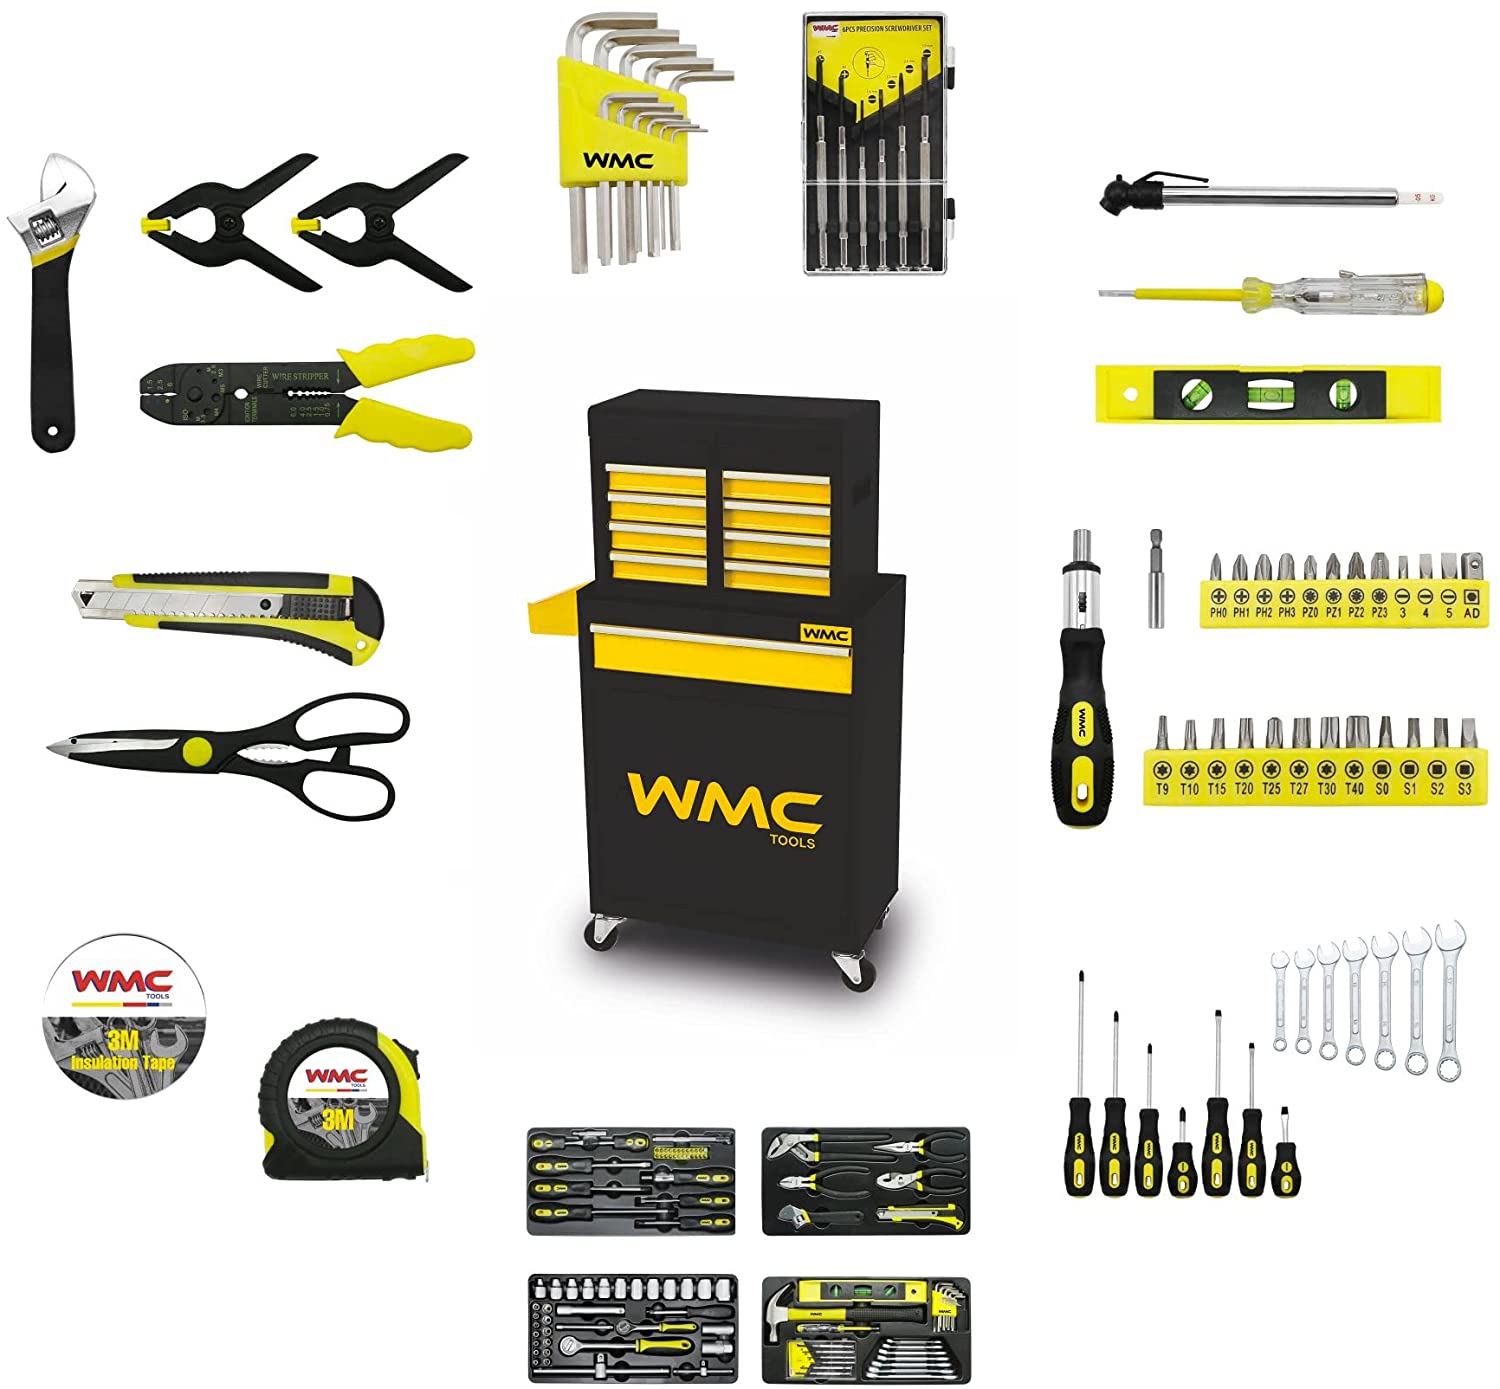 Wmc garage drawer roller cabinet with tool set of 257 instruments, trolley for hand tools storage and securing